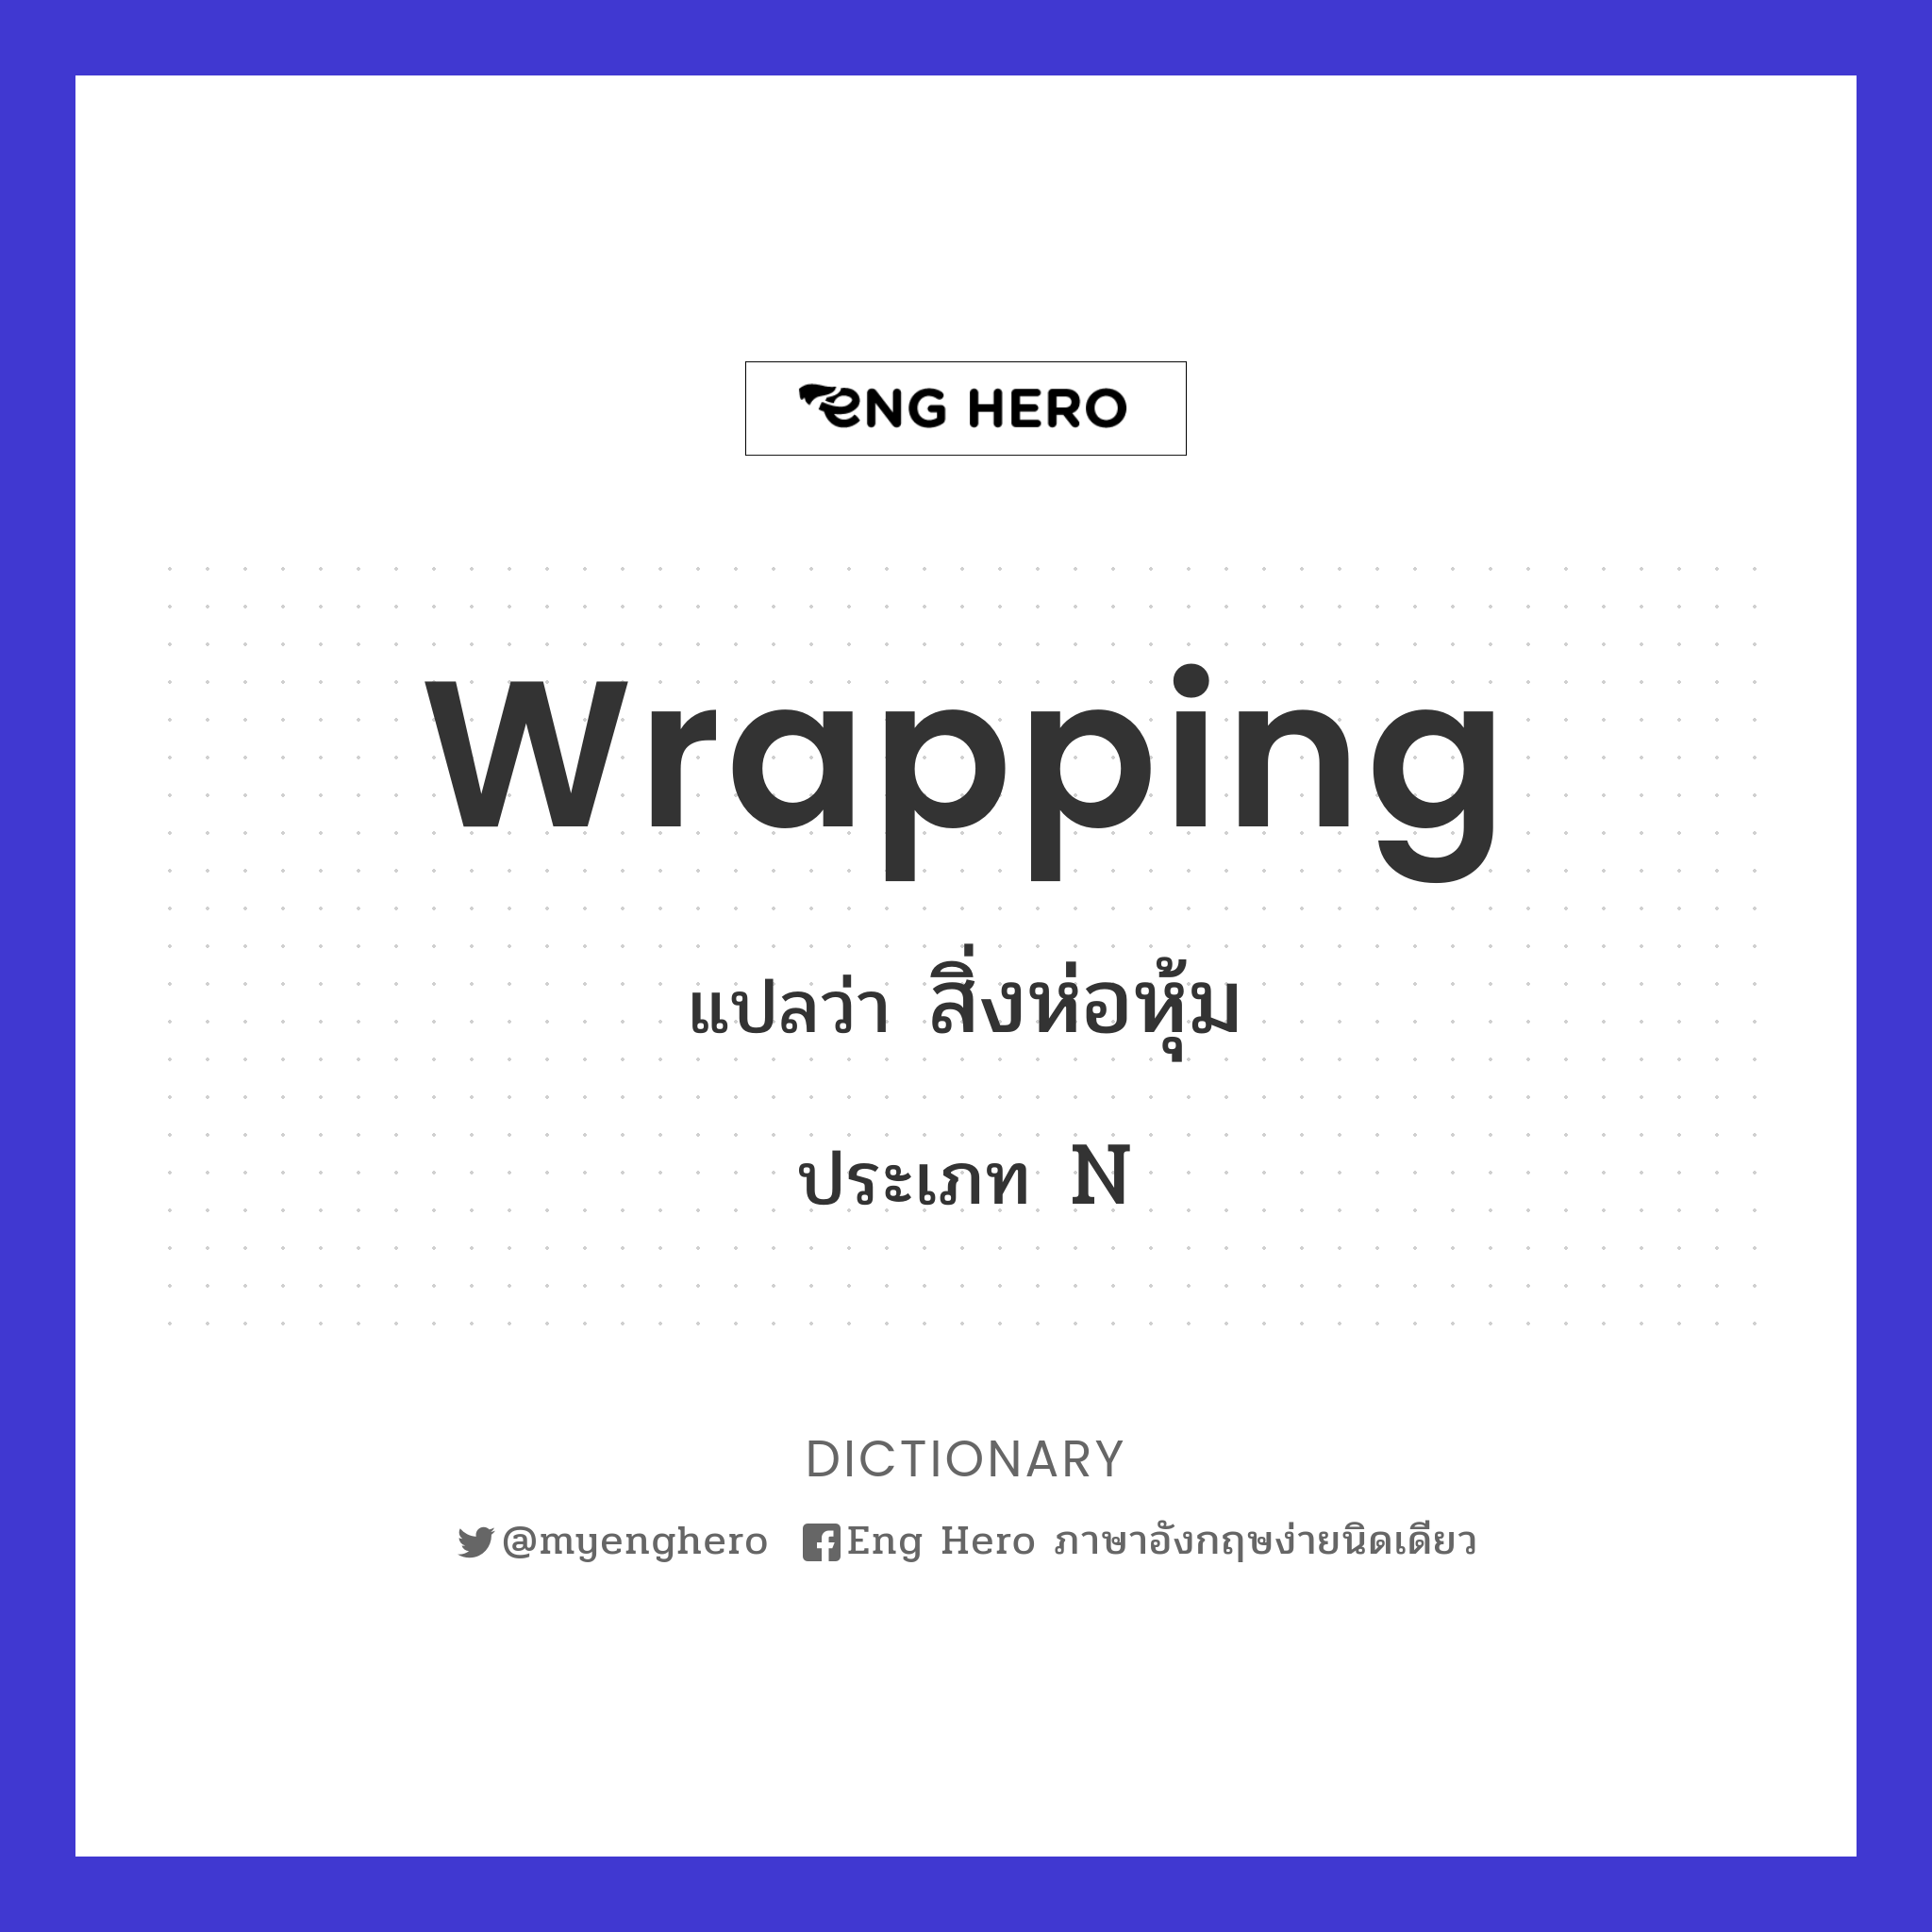 wrapping